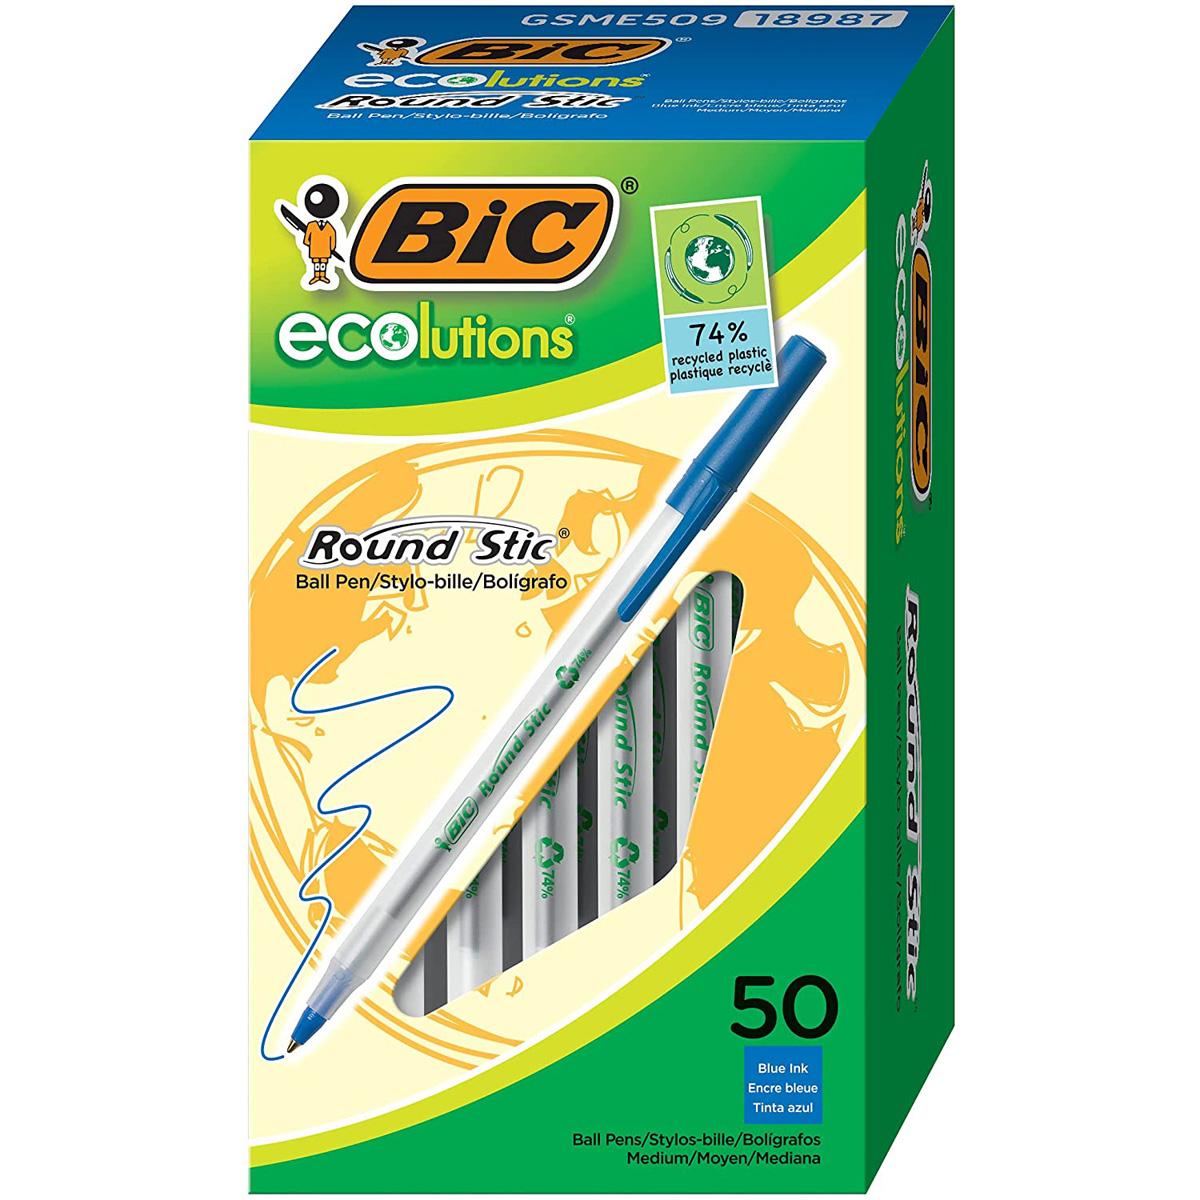 50 BIC Ecolutions Round Stic Ballpoint Pens for $4.59